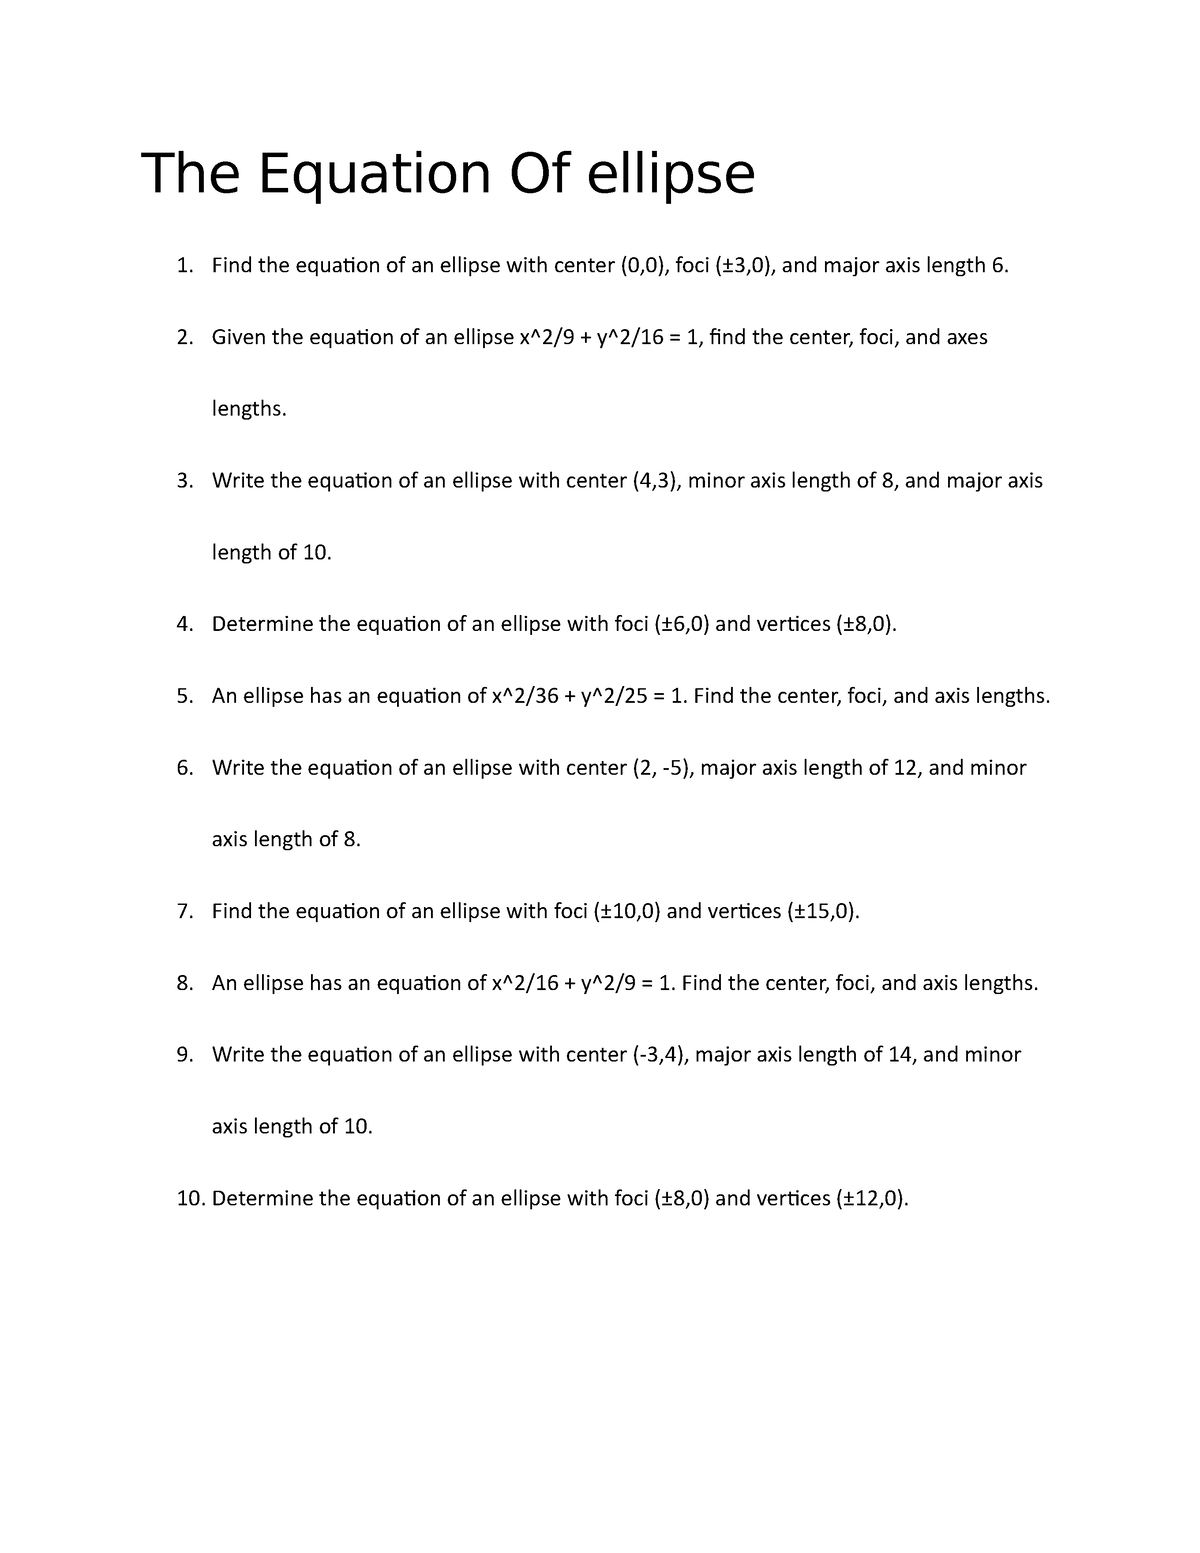 The Equation Of ellipse question and answers The Equation Of ellipse